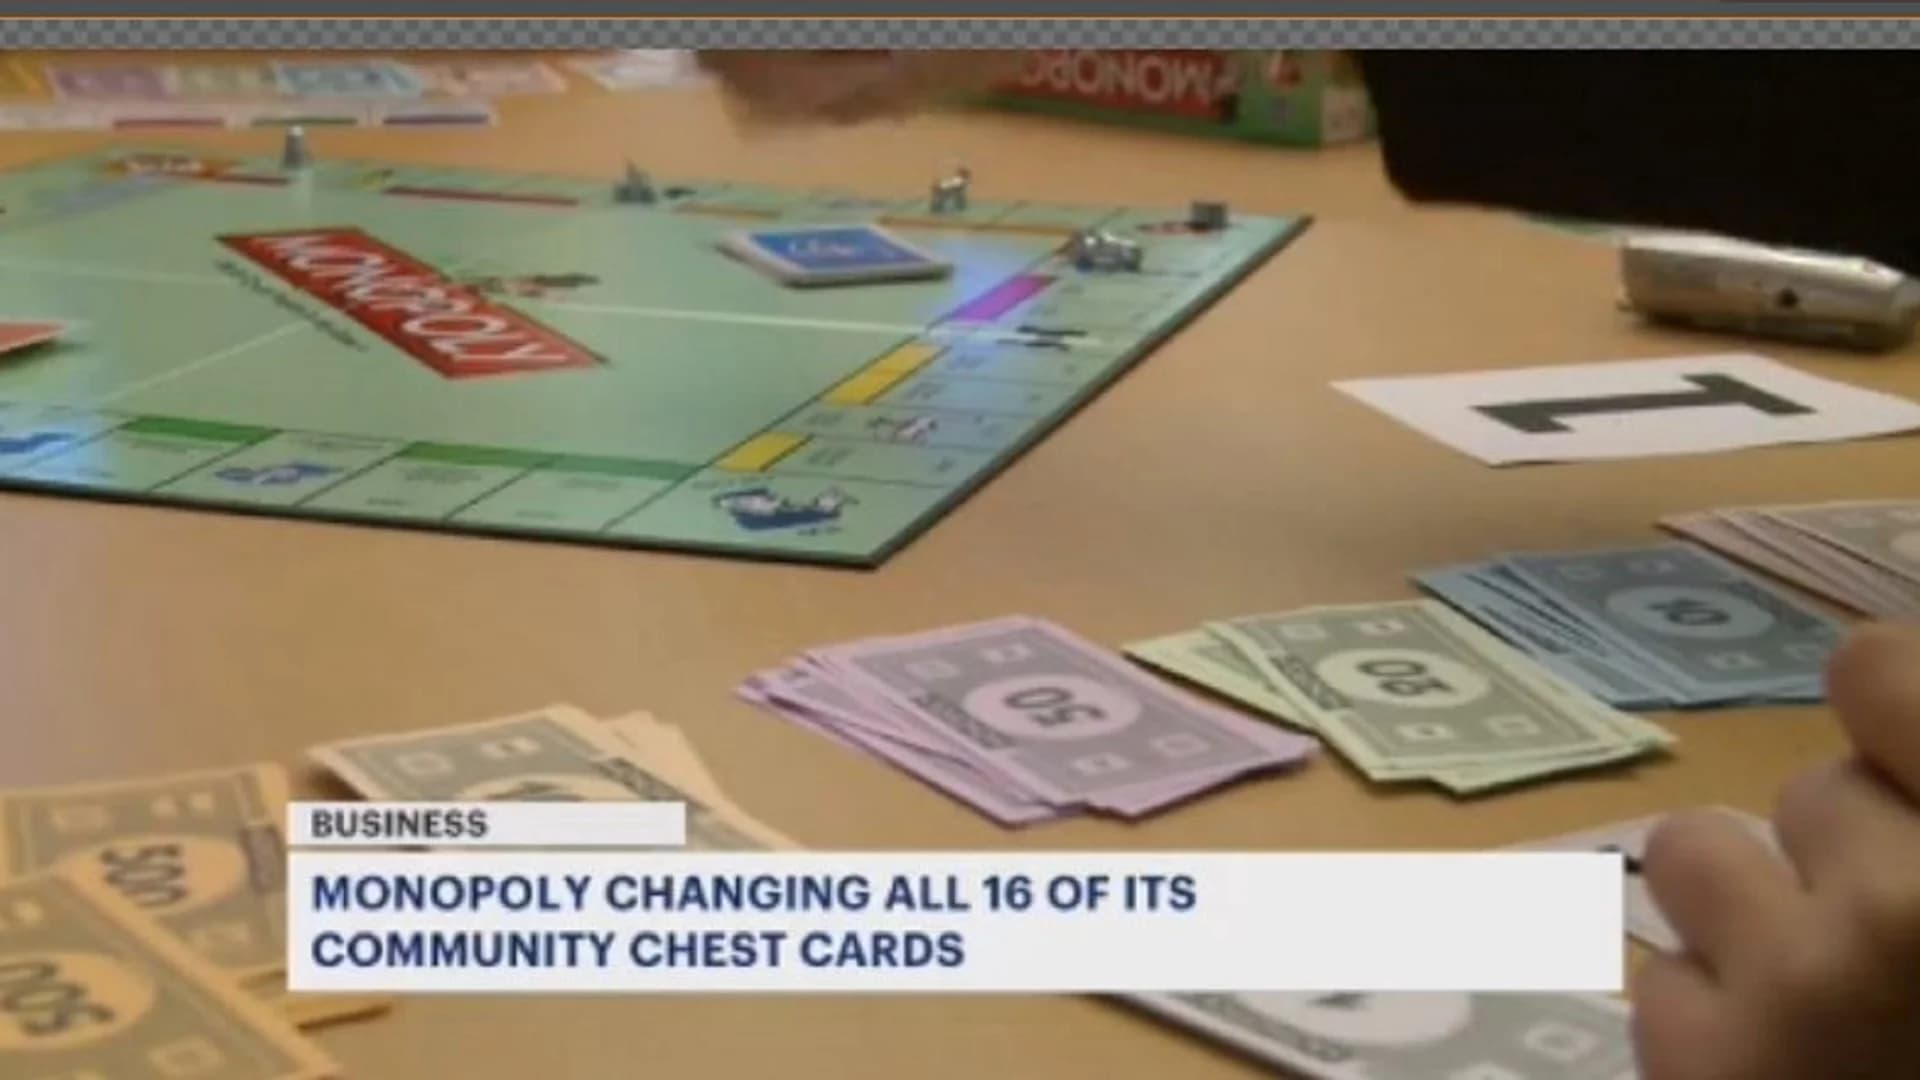 Monopoly seeks input from fans on its Community Chest cards overhaul